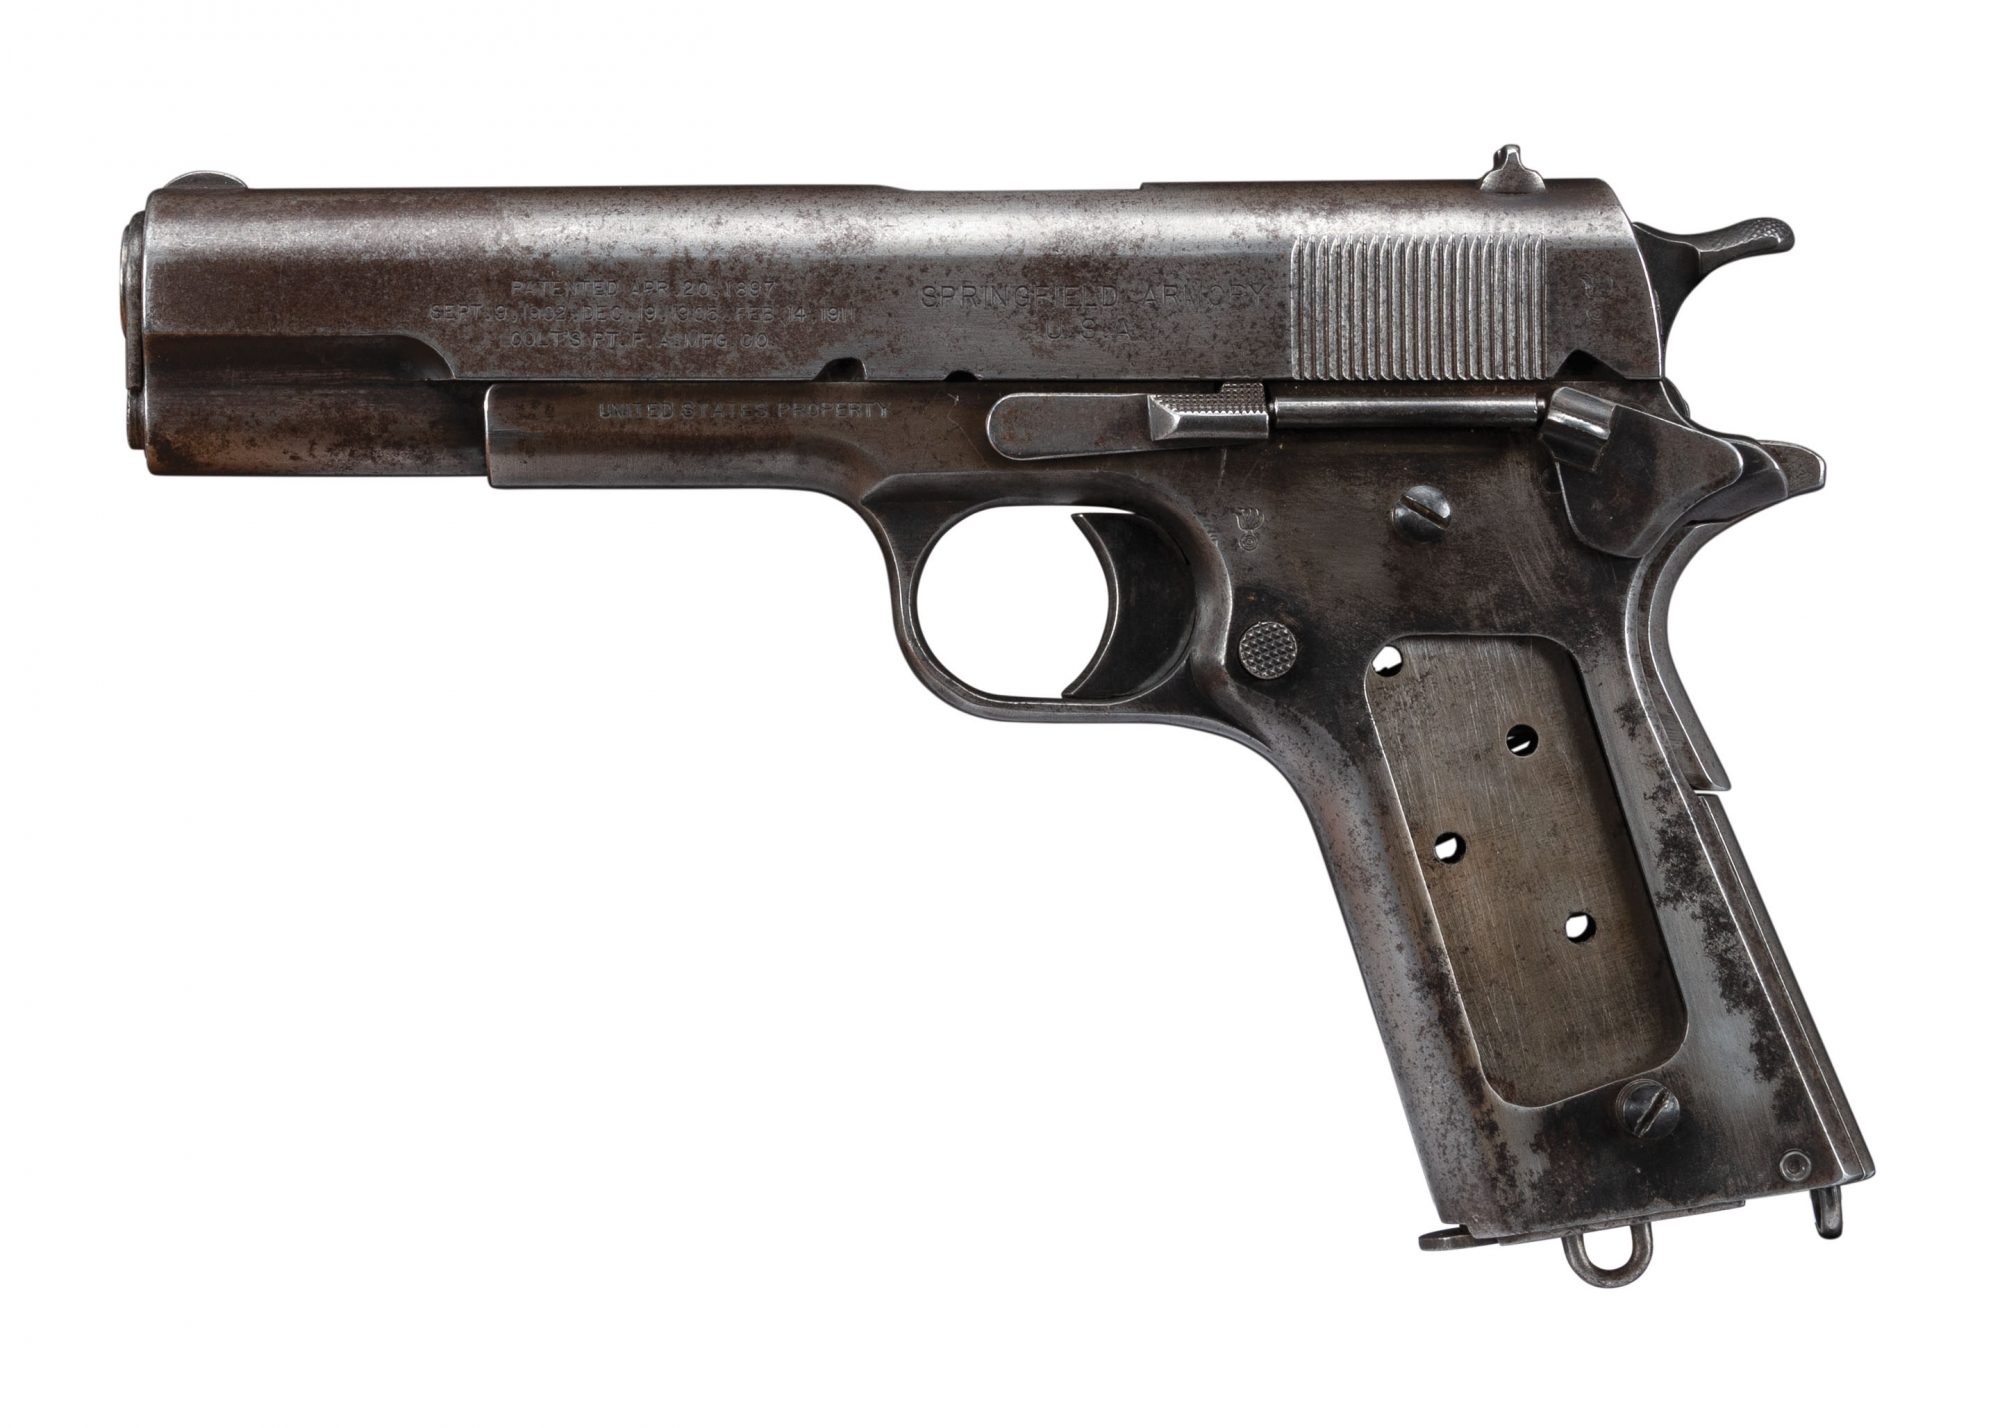 Photo of a Springfield Armory Model 1911 from 1914, before restoration work performed by Turnbull Restoration of Bloomfield, NY